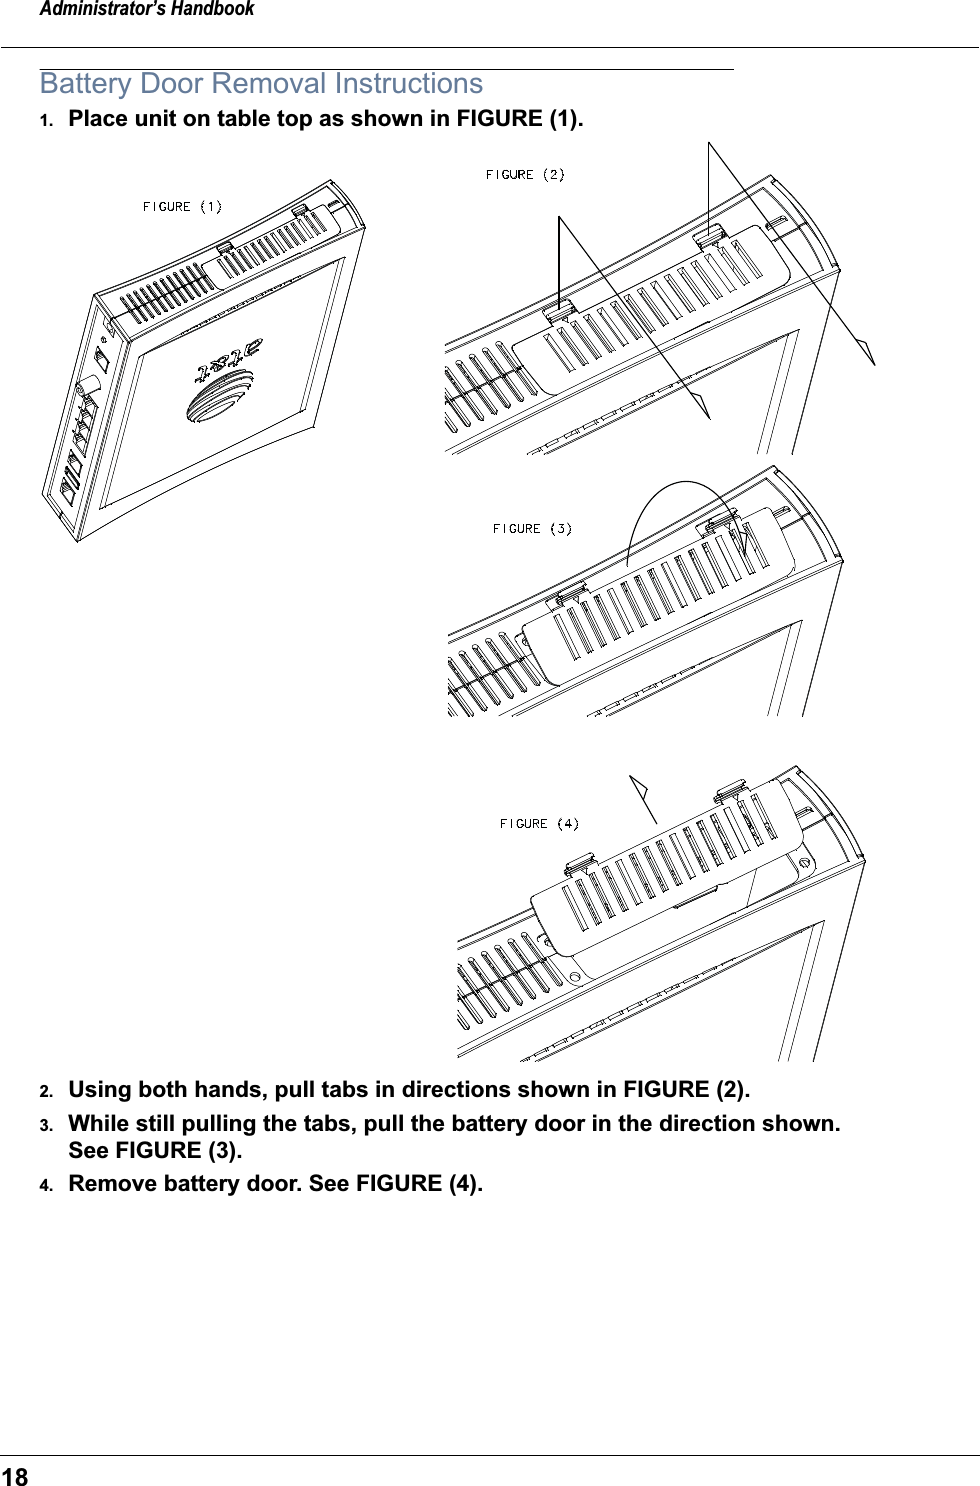 Administrator’s Handbook18Battery Door Removal Instructions1. Place unit on table top as shown in FIGURE (1).2. Using both hands, pull tabs in directions shown in FIGURE (2).3. While still pulling the tabs, pull the battery door in the direction shown. See FIGURE (3).4. Remove battery door. See FIGURE (4).